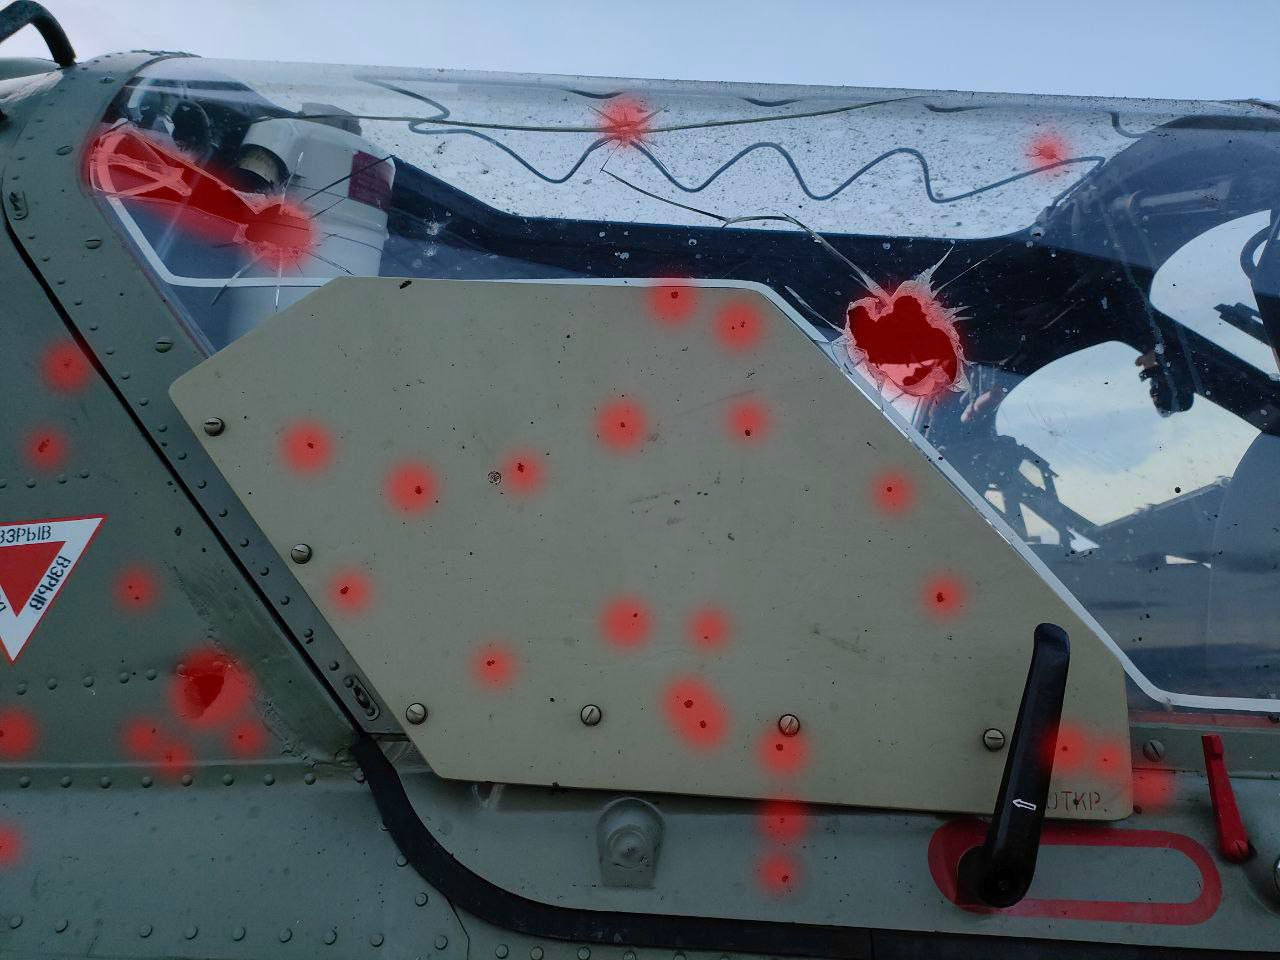 Side view of the pilot's cockpit of Ka-52 after the ATACMS strike. Damage caused by missile highlighted in red